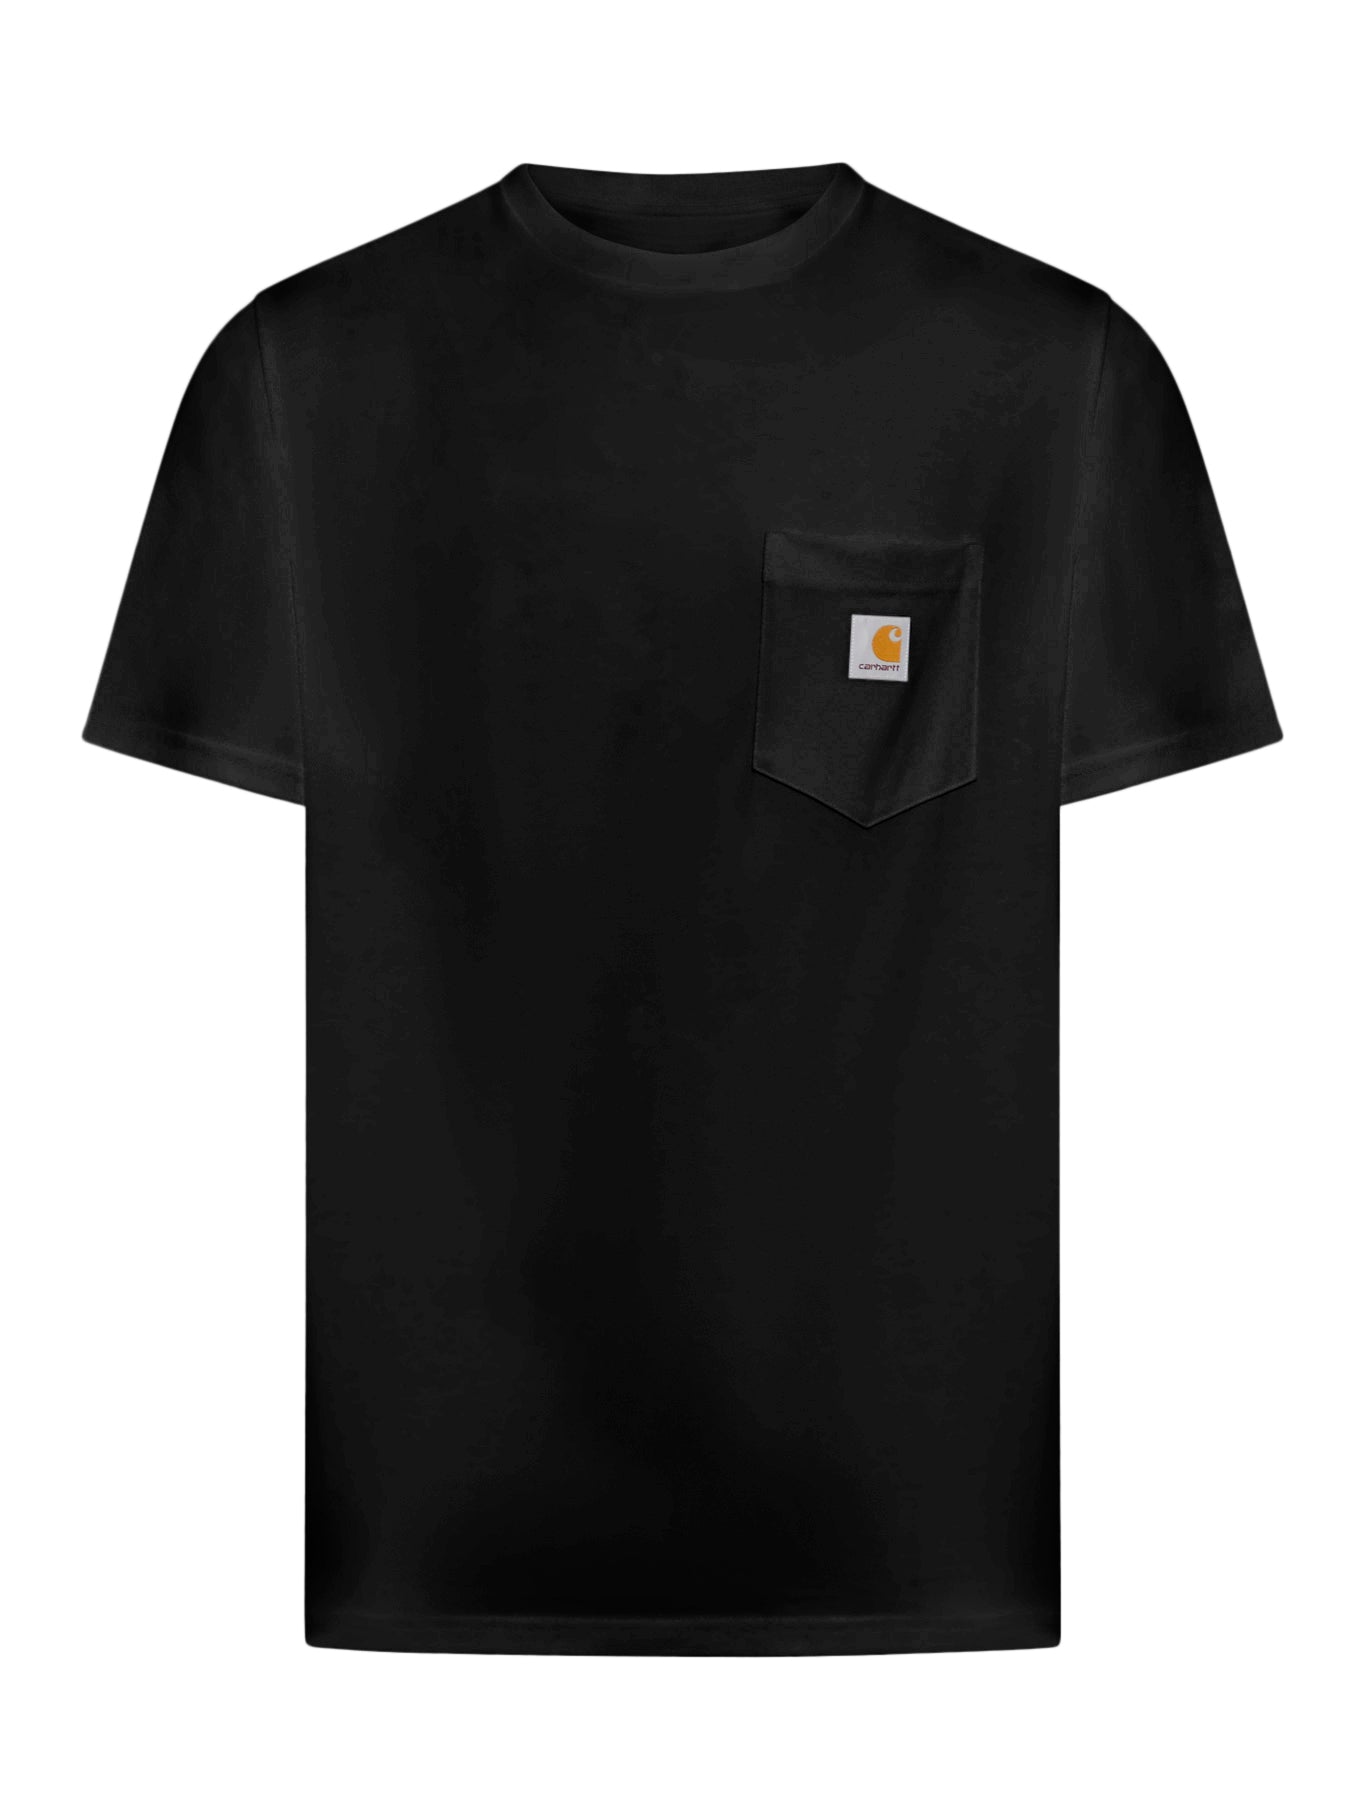 COTTON T-SHIRT WITH LOGO PATCH